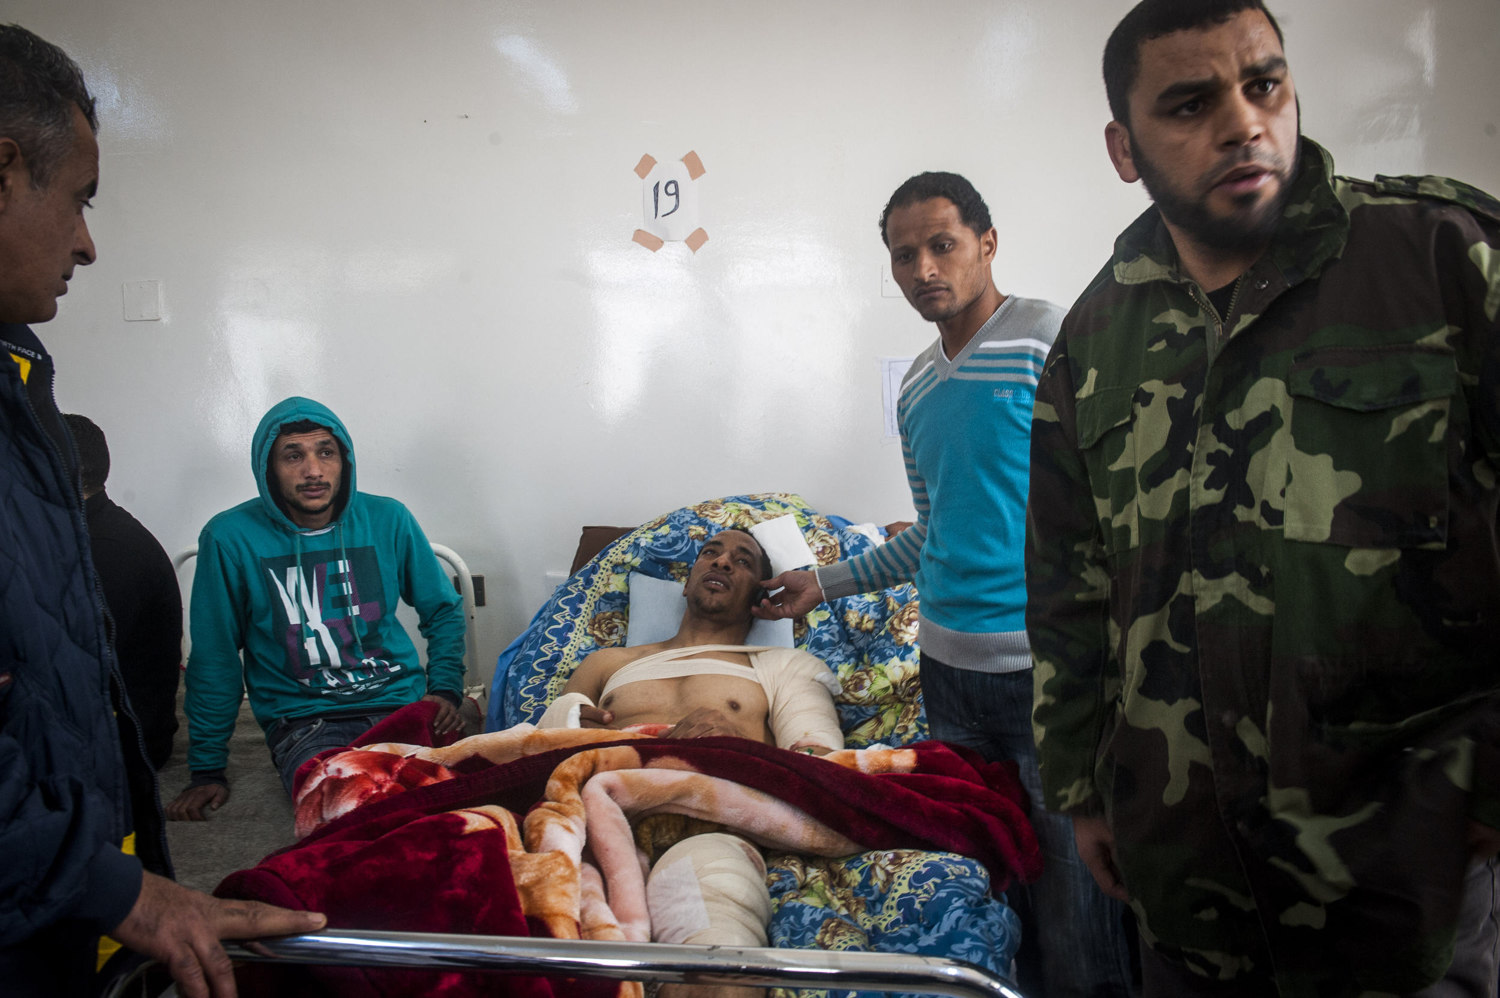  A man calls his family while friends attend to him in the hospital in Benghazi, Libya. 